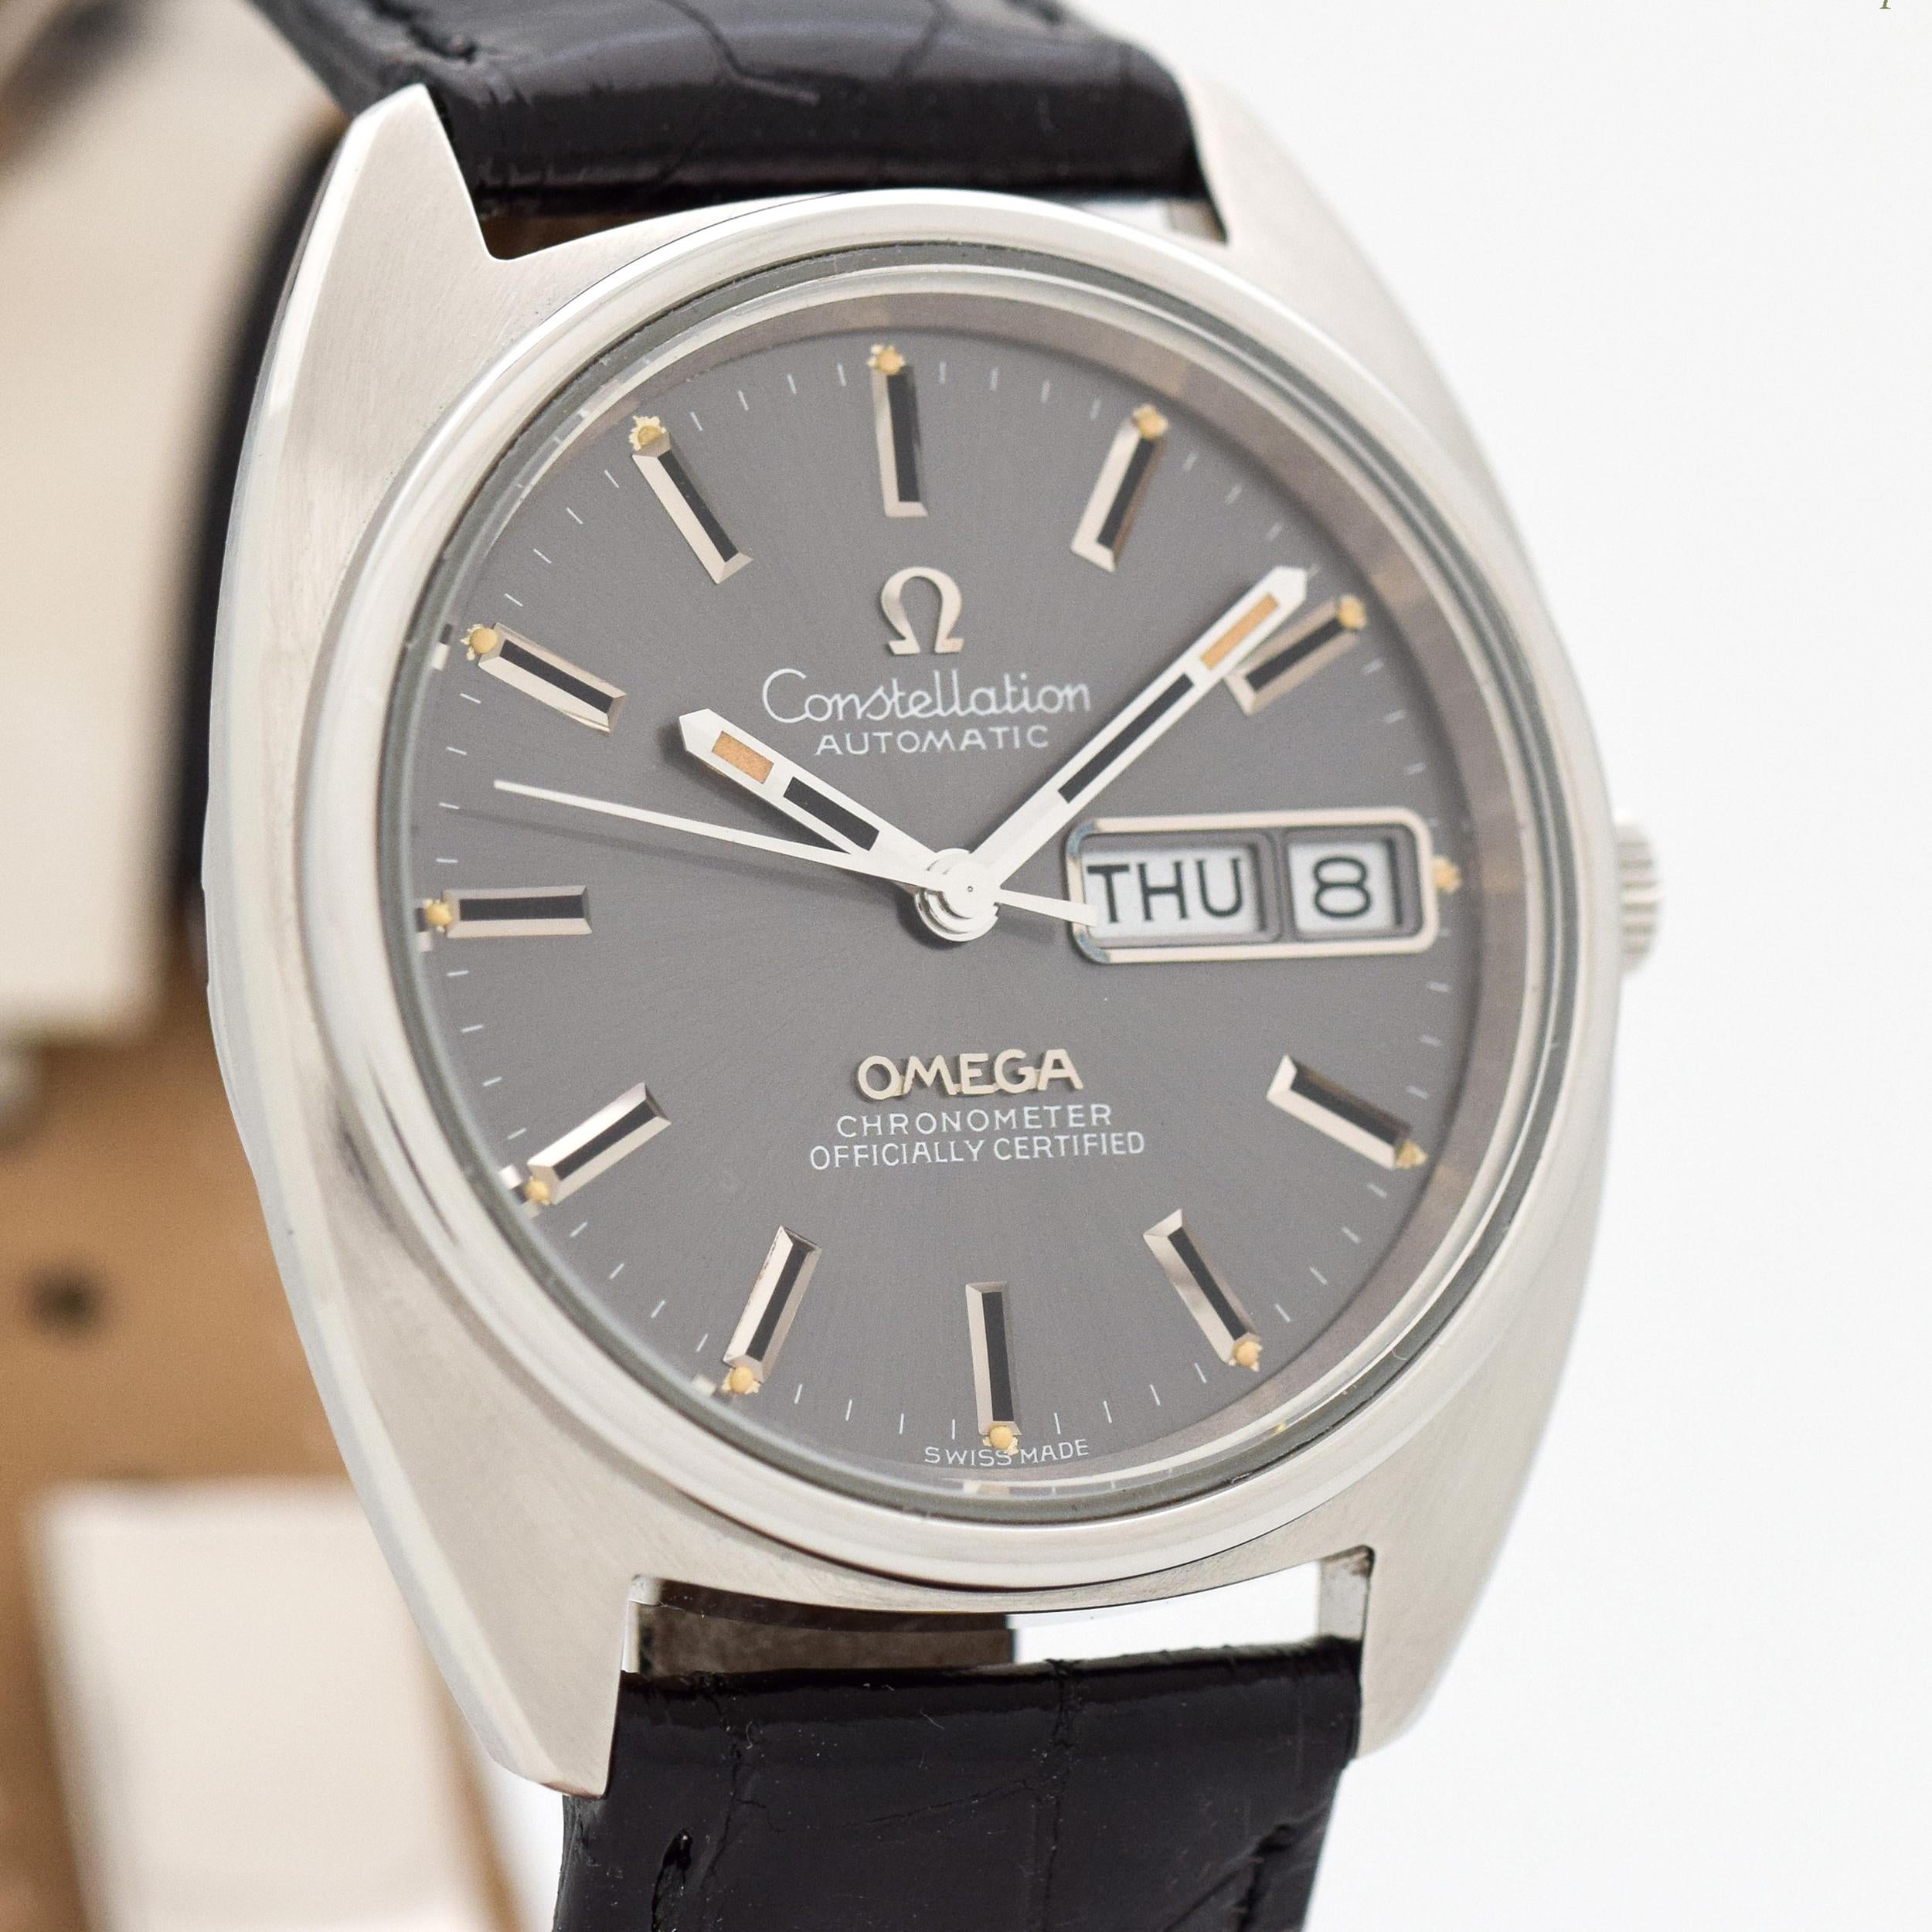 1973 Vintage Omega Constellation Chronometer Day - Date Ref. 1680064 Stainless Steel watch with Original Gray Dial with Applied Steel Beveled Stick/Bar/Baton Markers with Gray Inlay. 35mm x 40mm lug to lug (1.38 in. x 1.57 in.) - 23 jewel, automatic